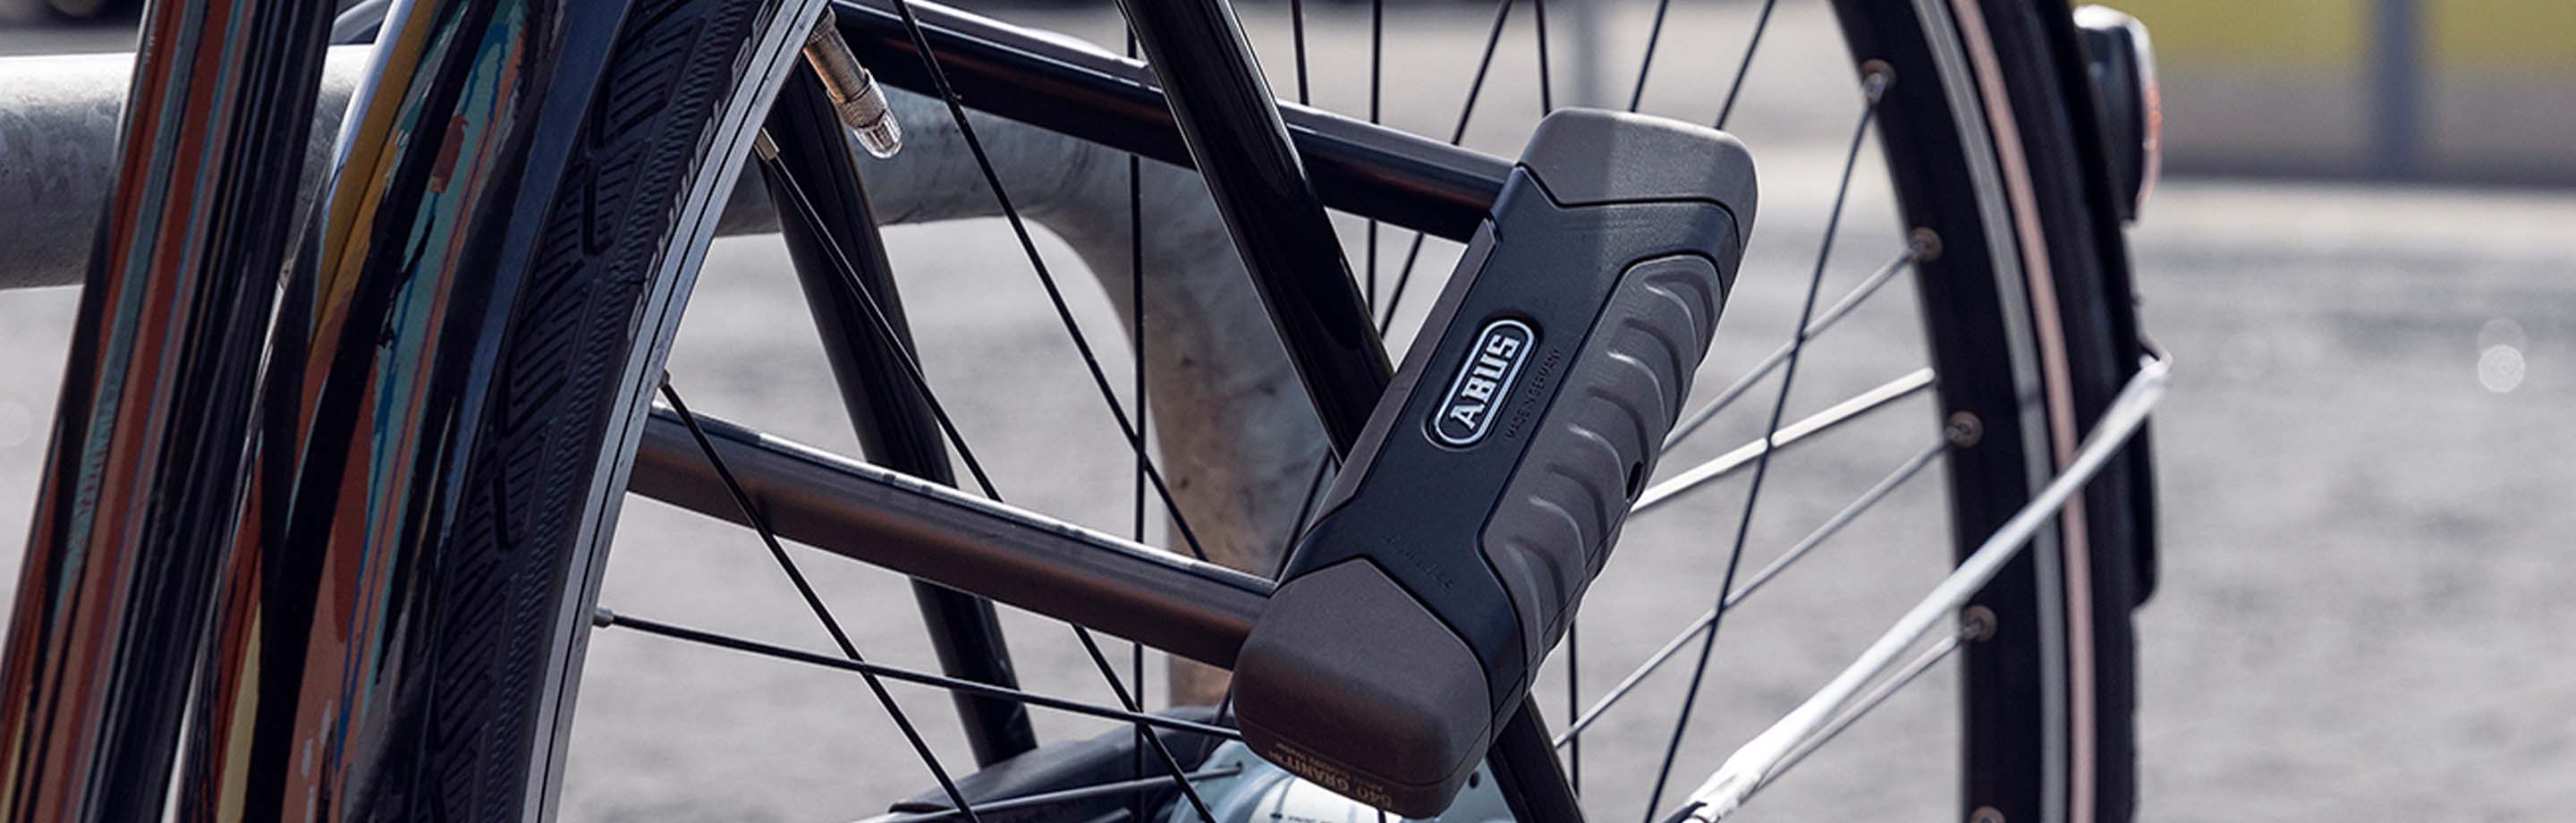 ABUS Locks - Security for Your Bike!